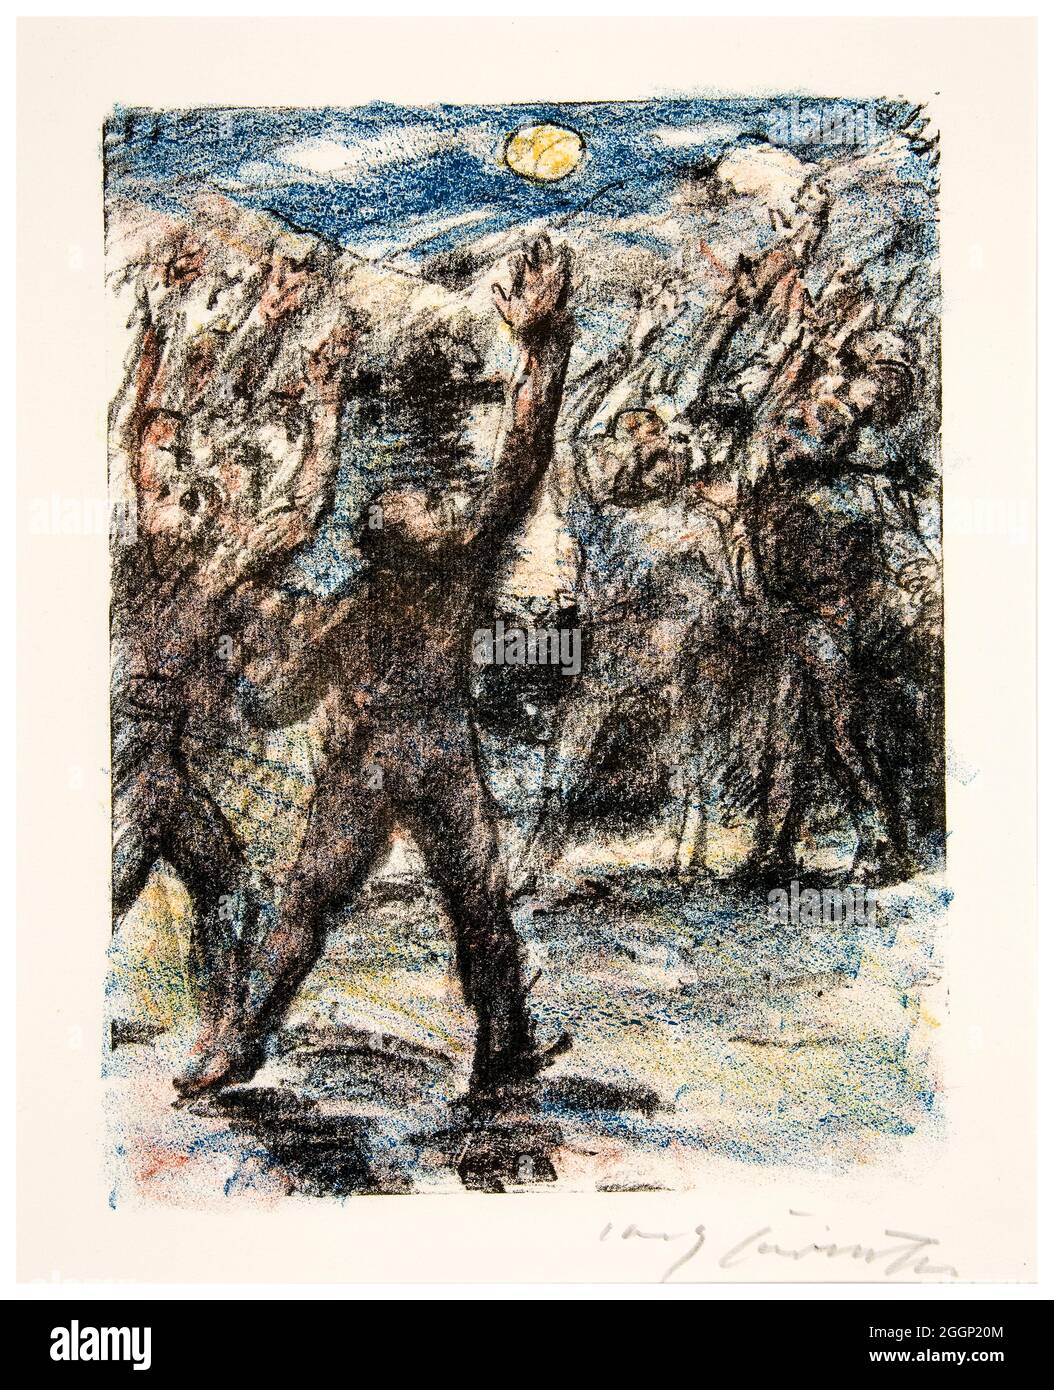 Lovis Corinth, William Tell, the Oath at the Rutli, lithographic print, before 1925 Stock Photo